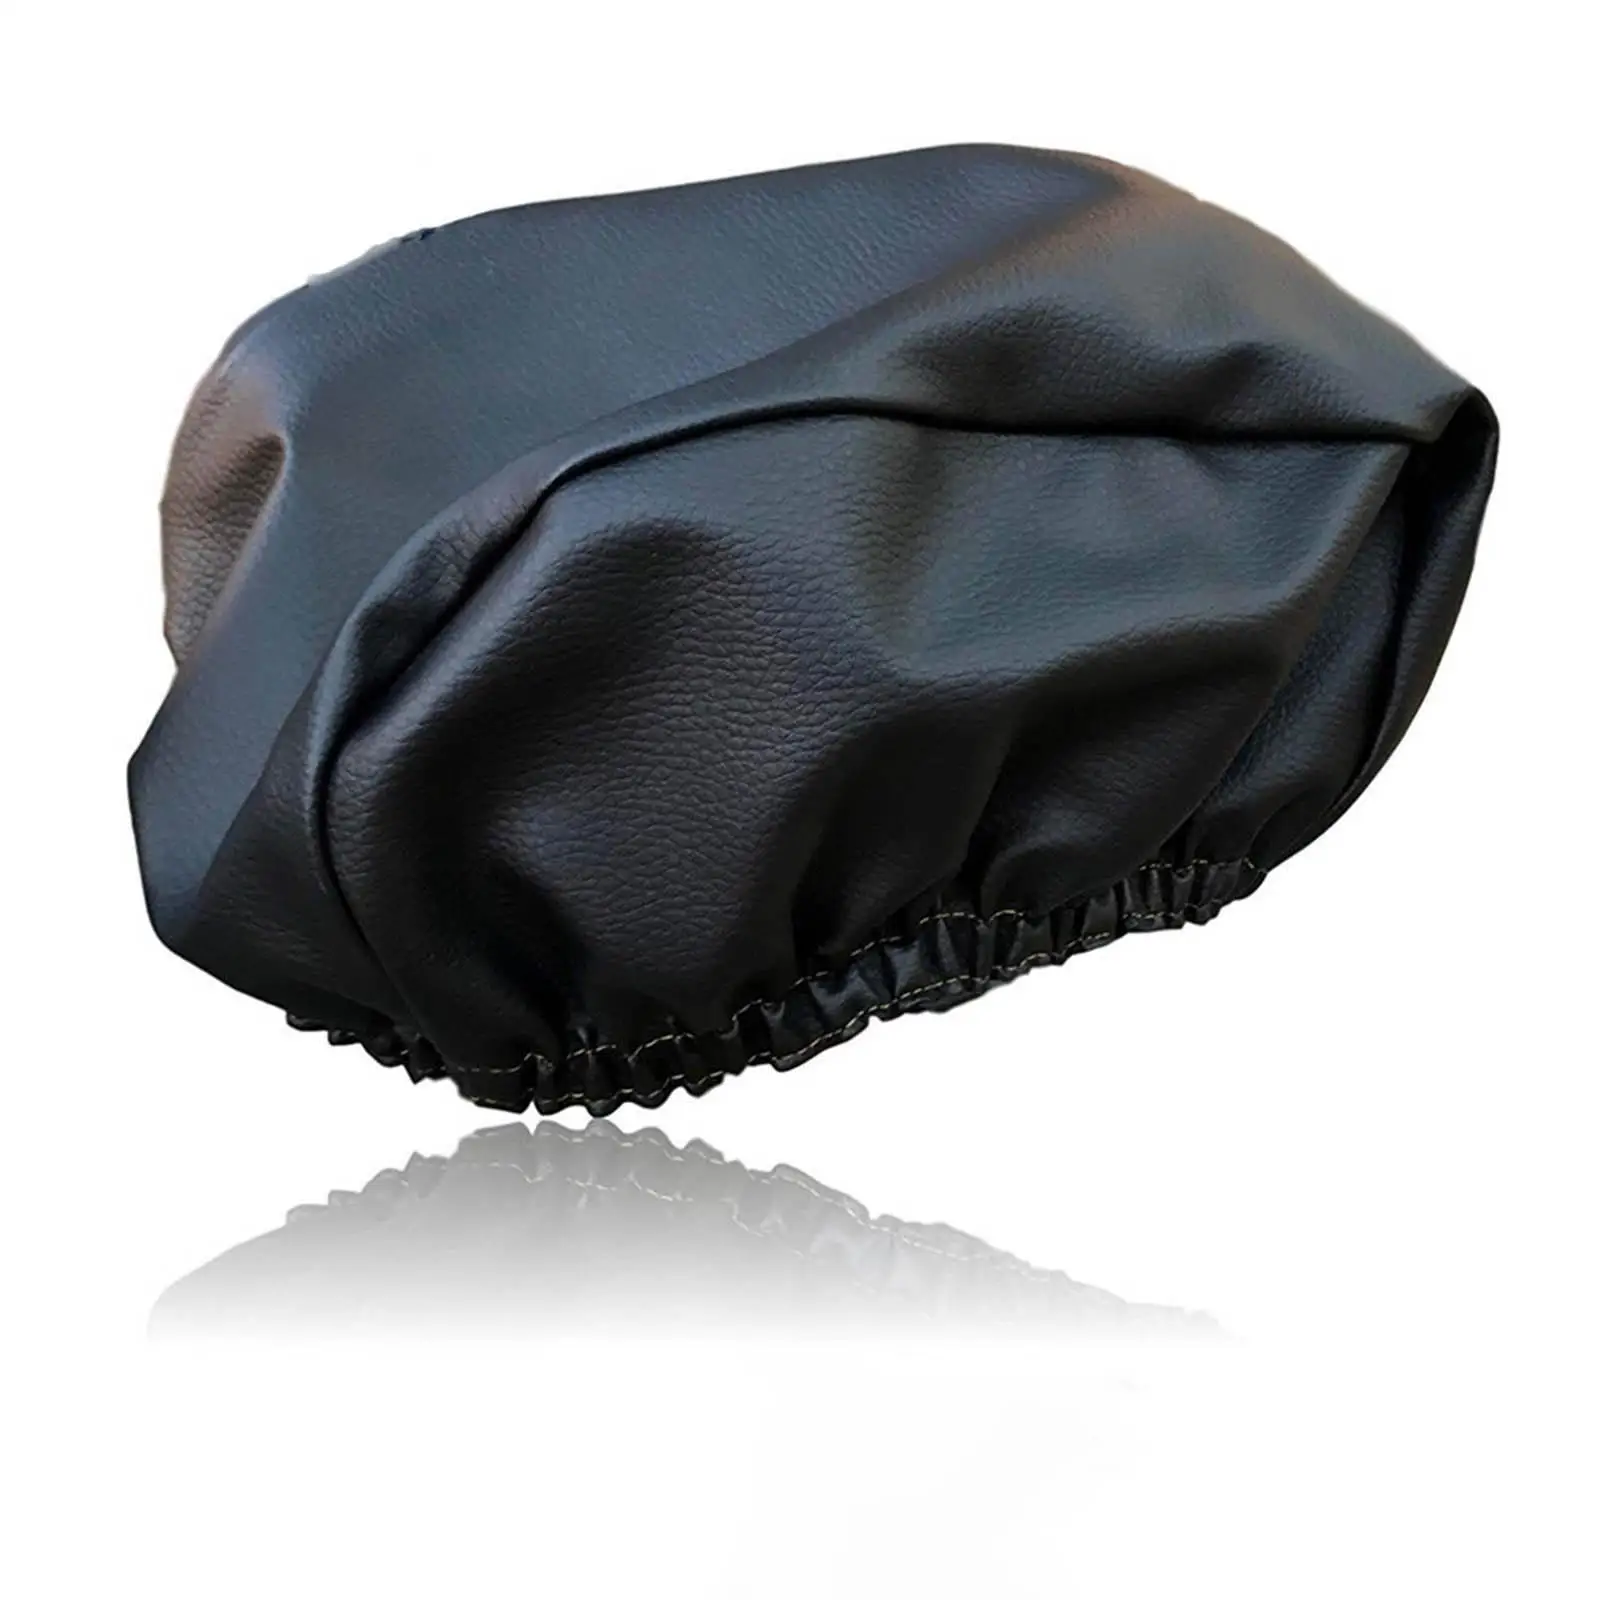 Black Winch Cover Simple Installation Accs Protector Durable Heavy Duty Waterproof Keep Clean Stain Resistant Dust Cover